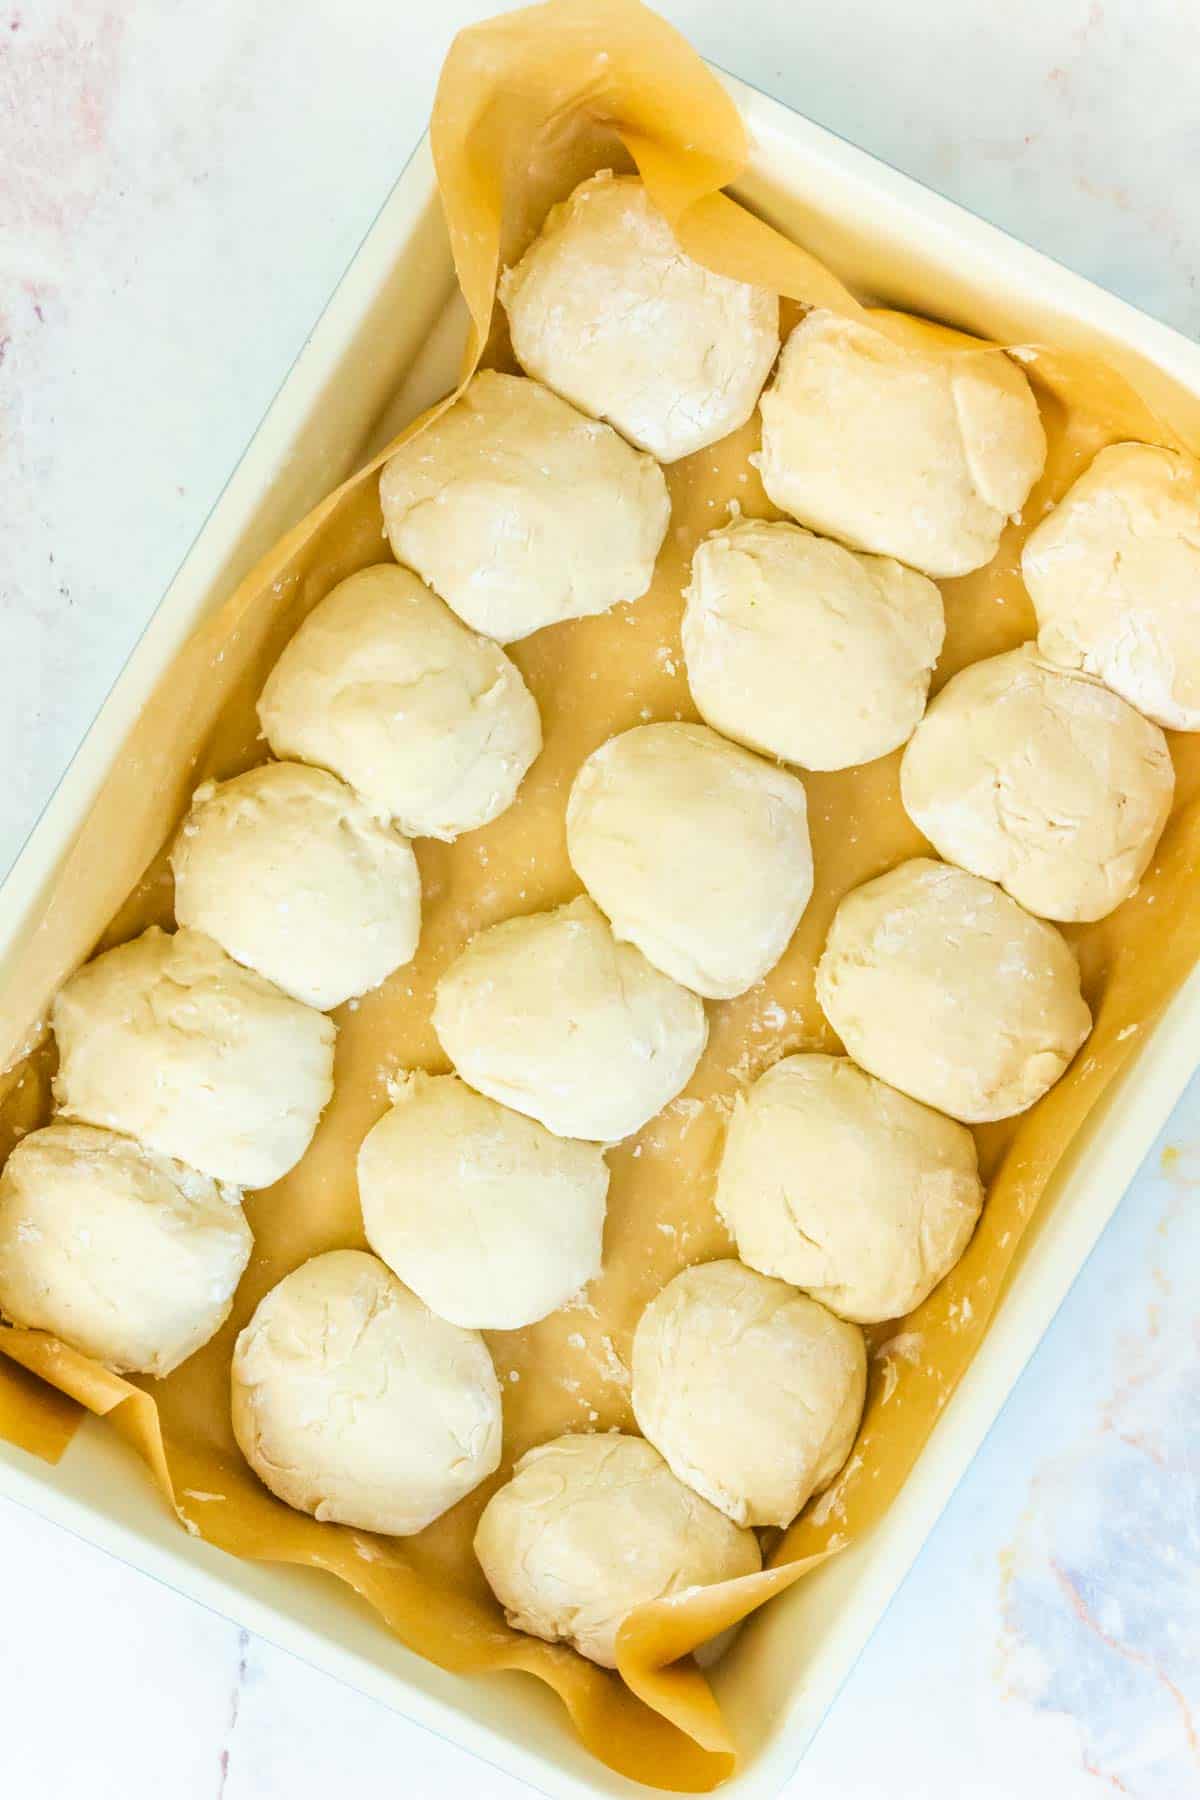 unbaked balls of dinner roll rough in a parchment-lined baking pan